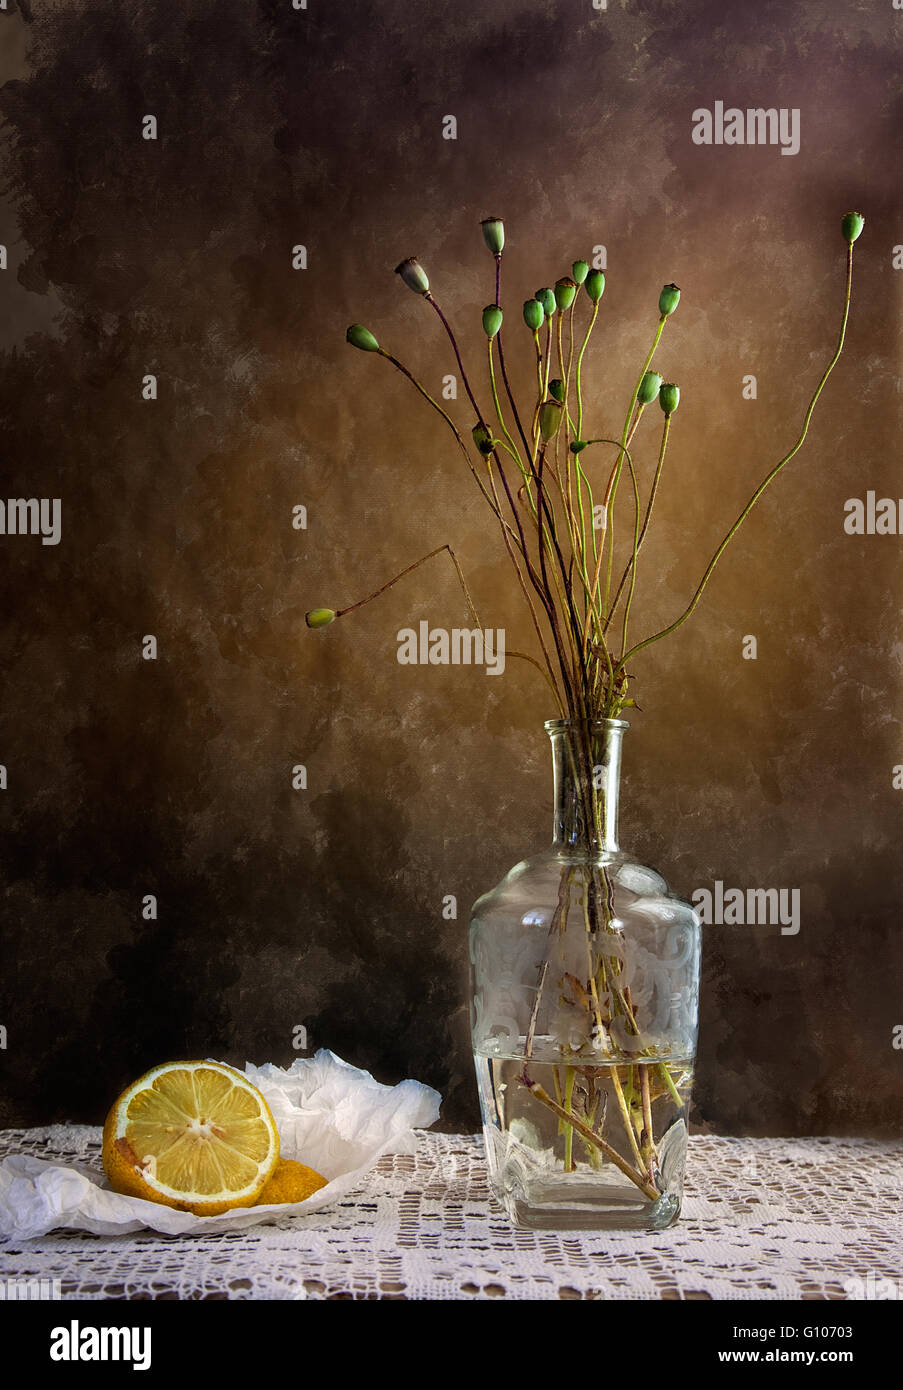 Still Life with Lemon and withered poppies in vase Stock Photo